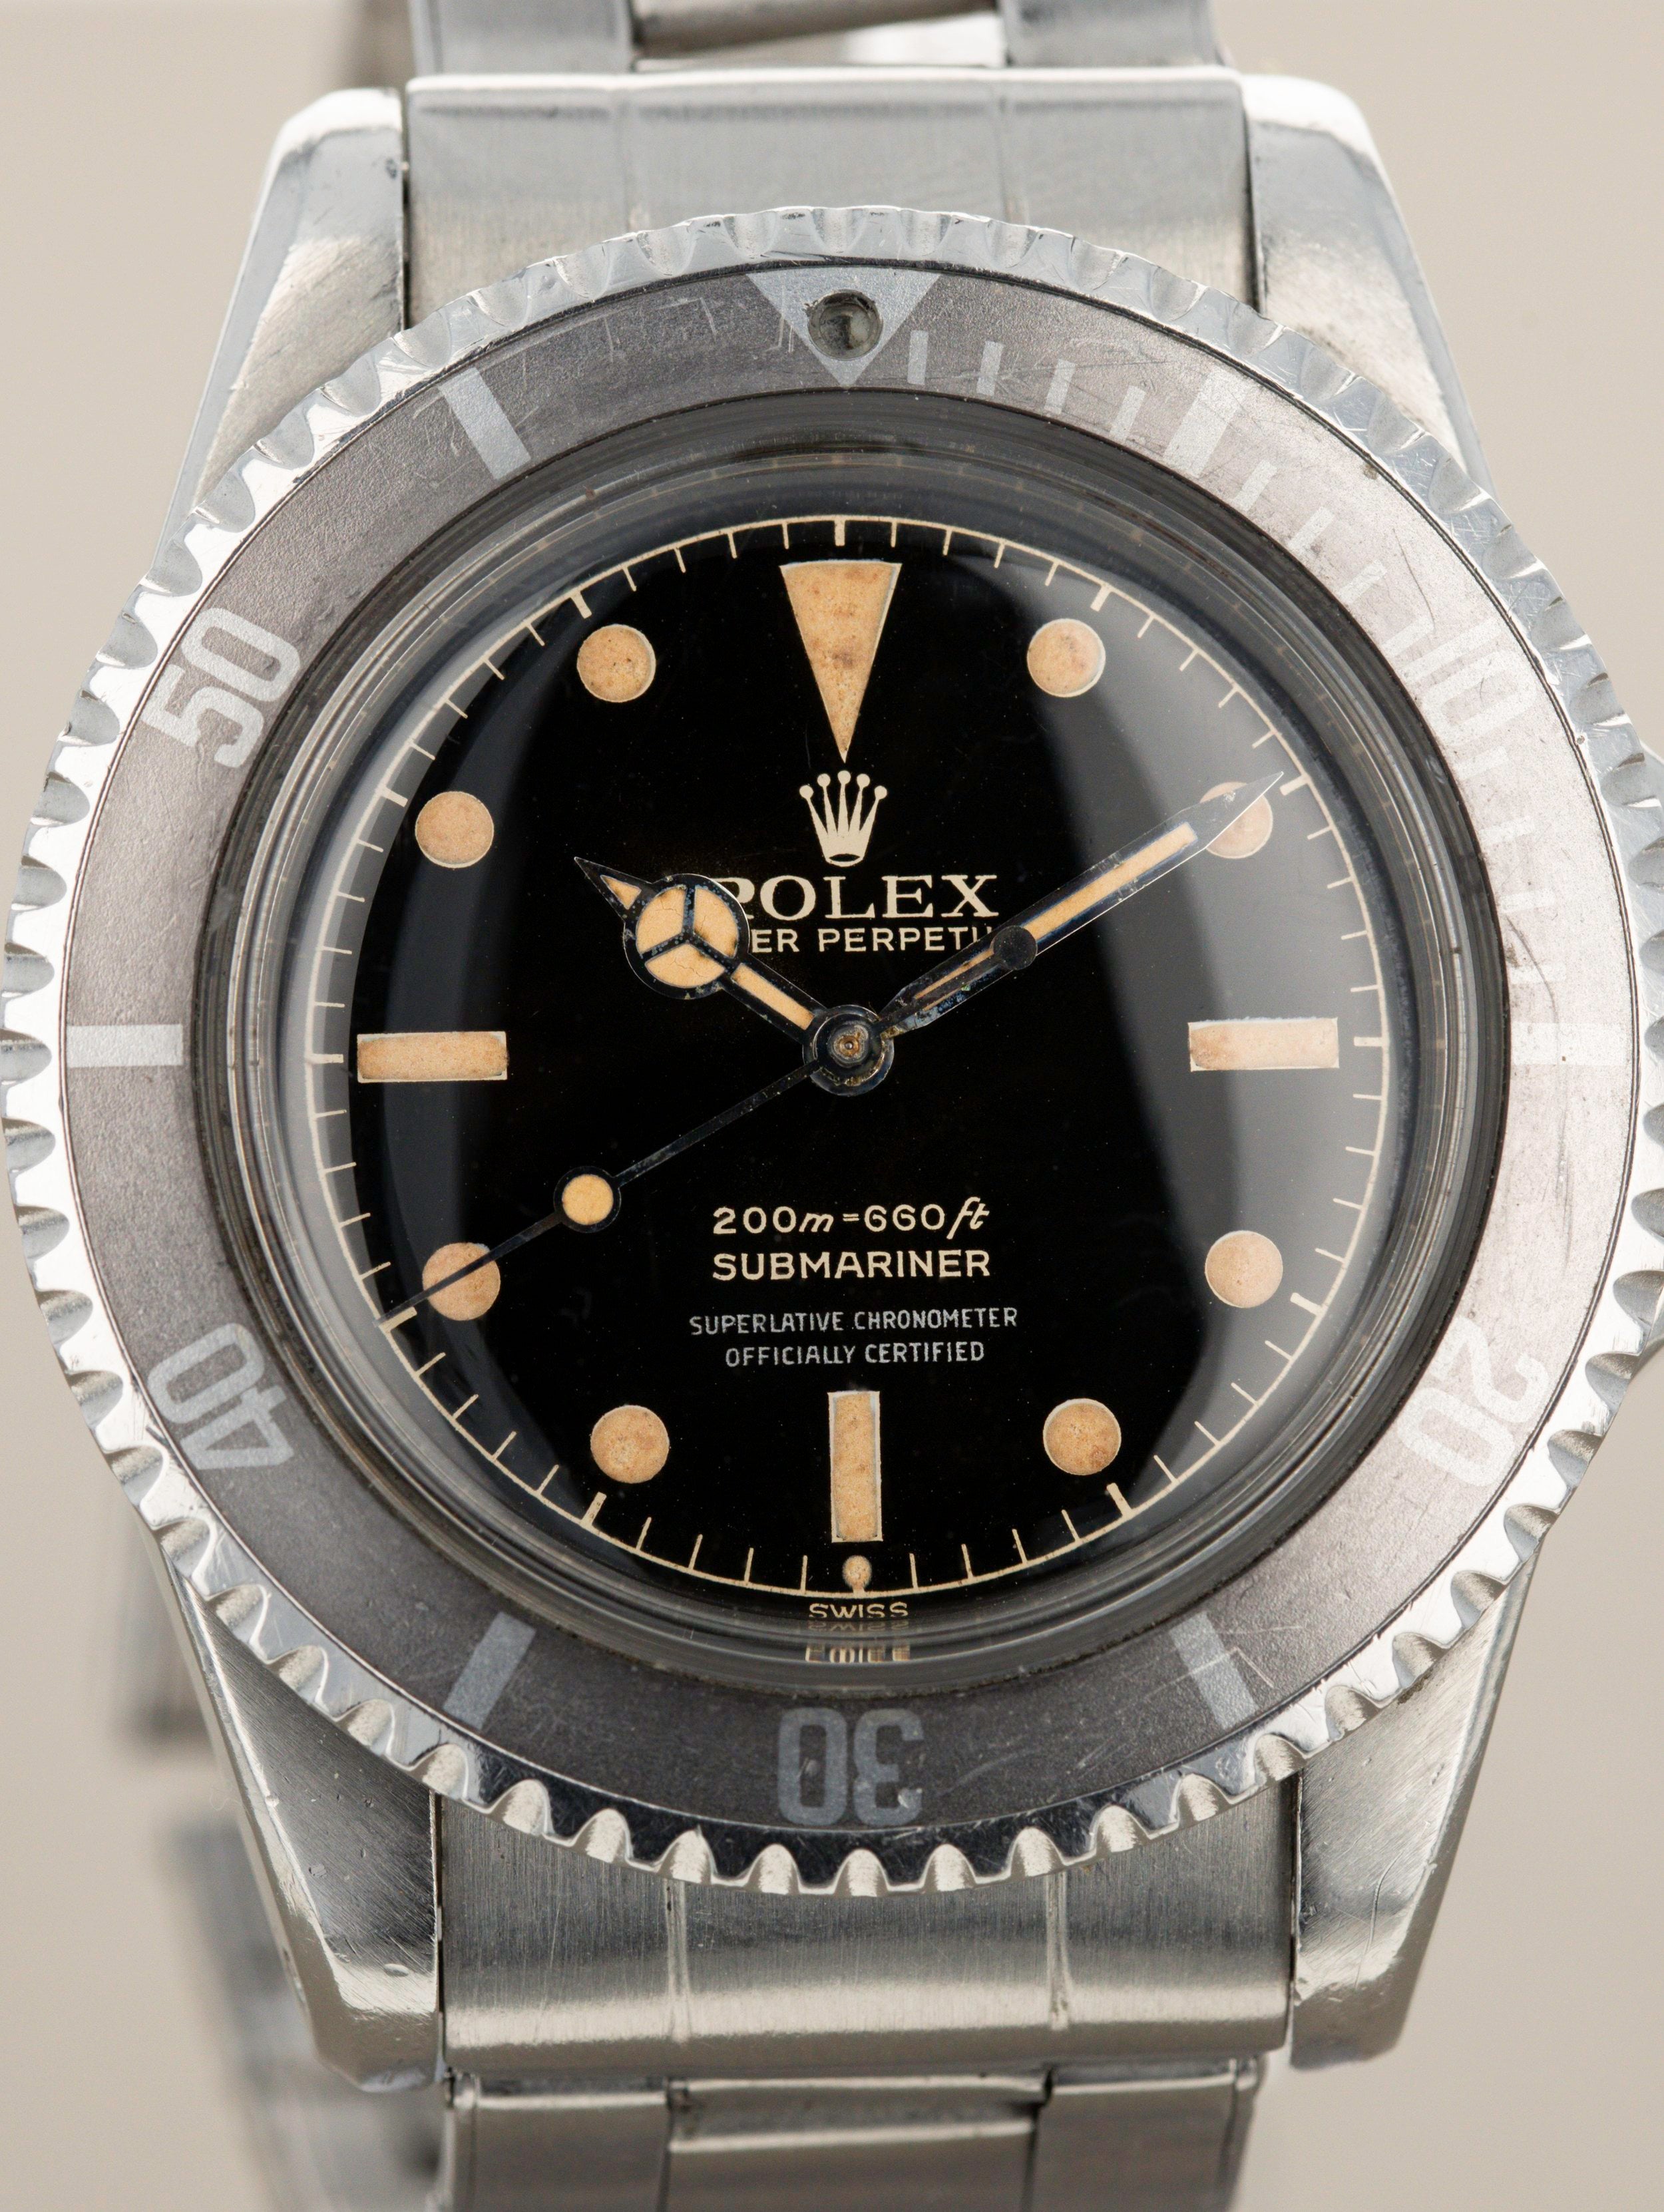 Rolex Submariner Ref. 5512 - Gilt 4-Line Chapter Ring PCG Exclamation Point